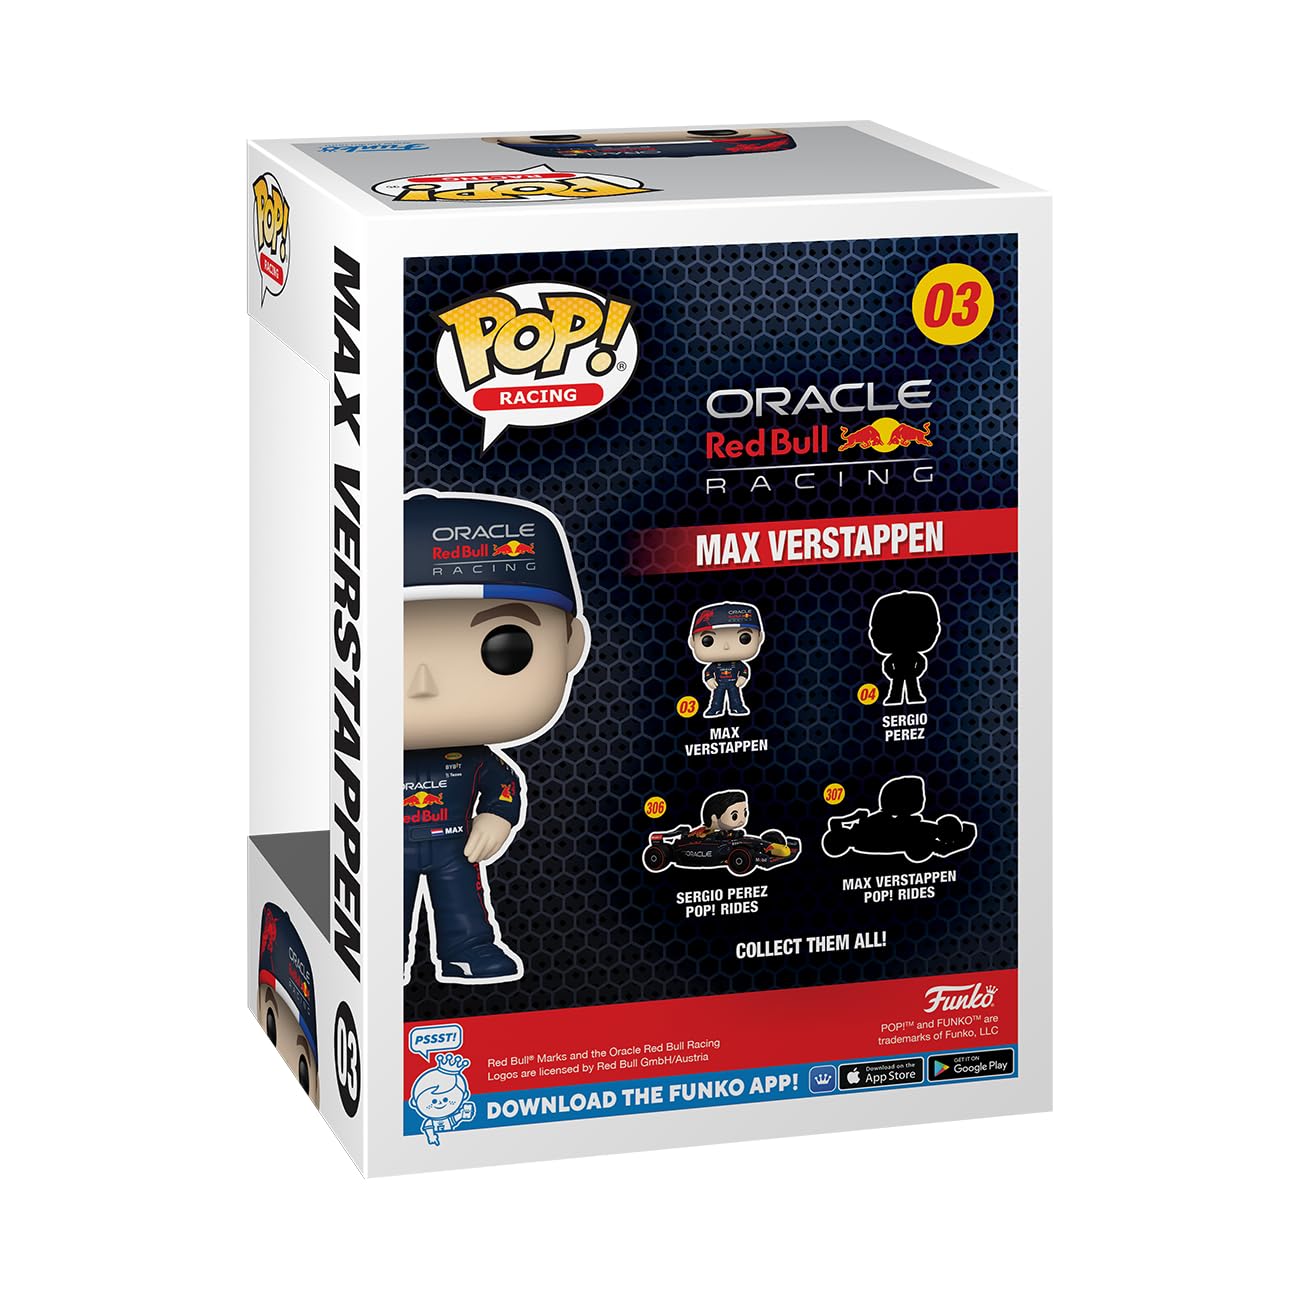 Funko Pop! Collectible Toy Figure - Charming Sunset 88